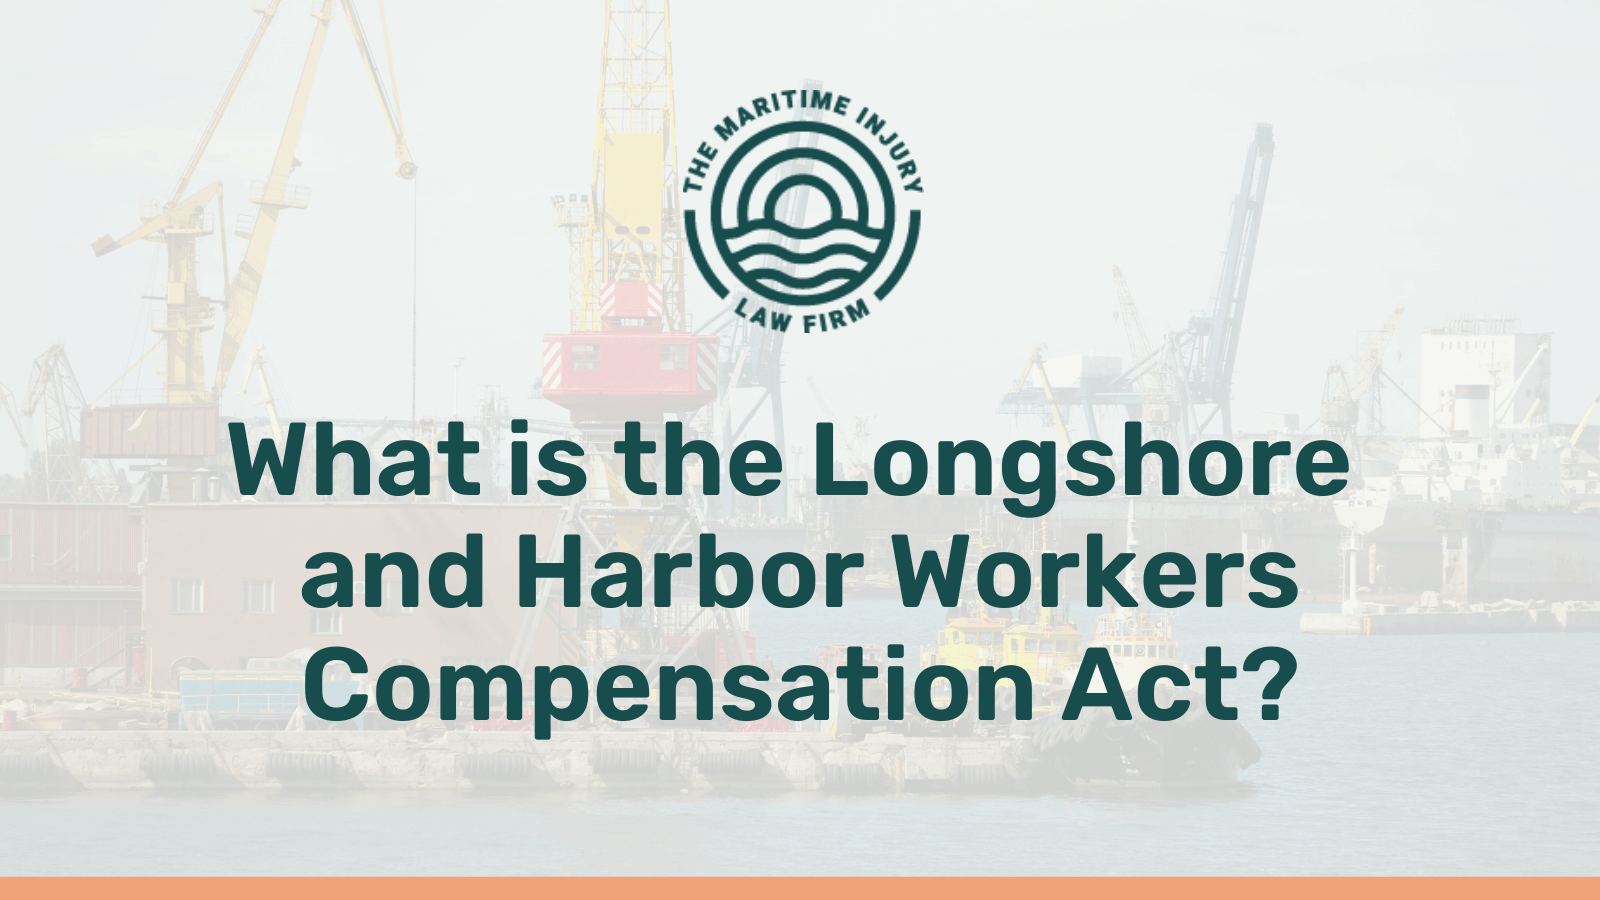 What is the Longshore and Harbor Workers Compensation Act - maritime injury law firm - George Vourvoulias